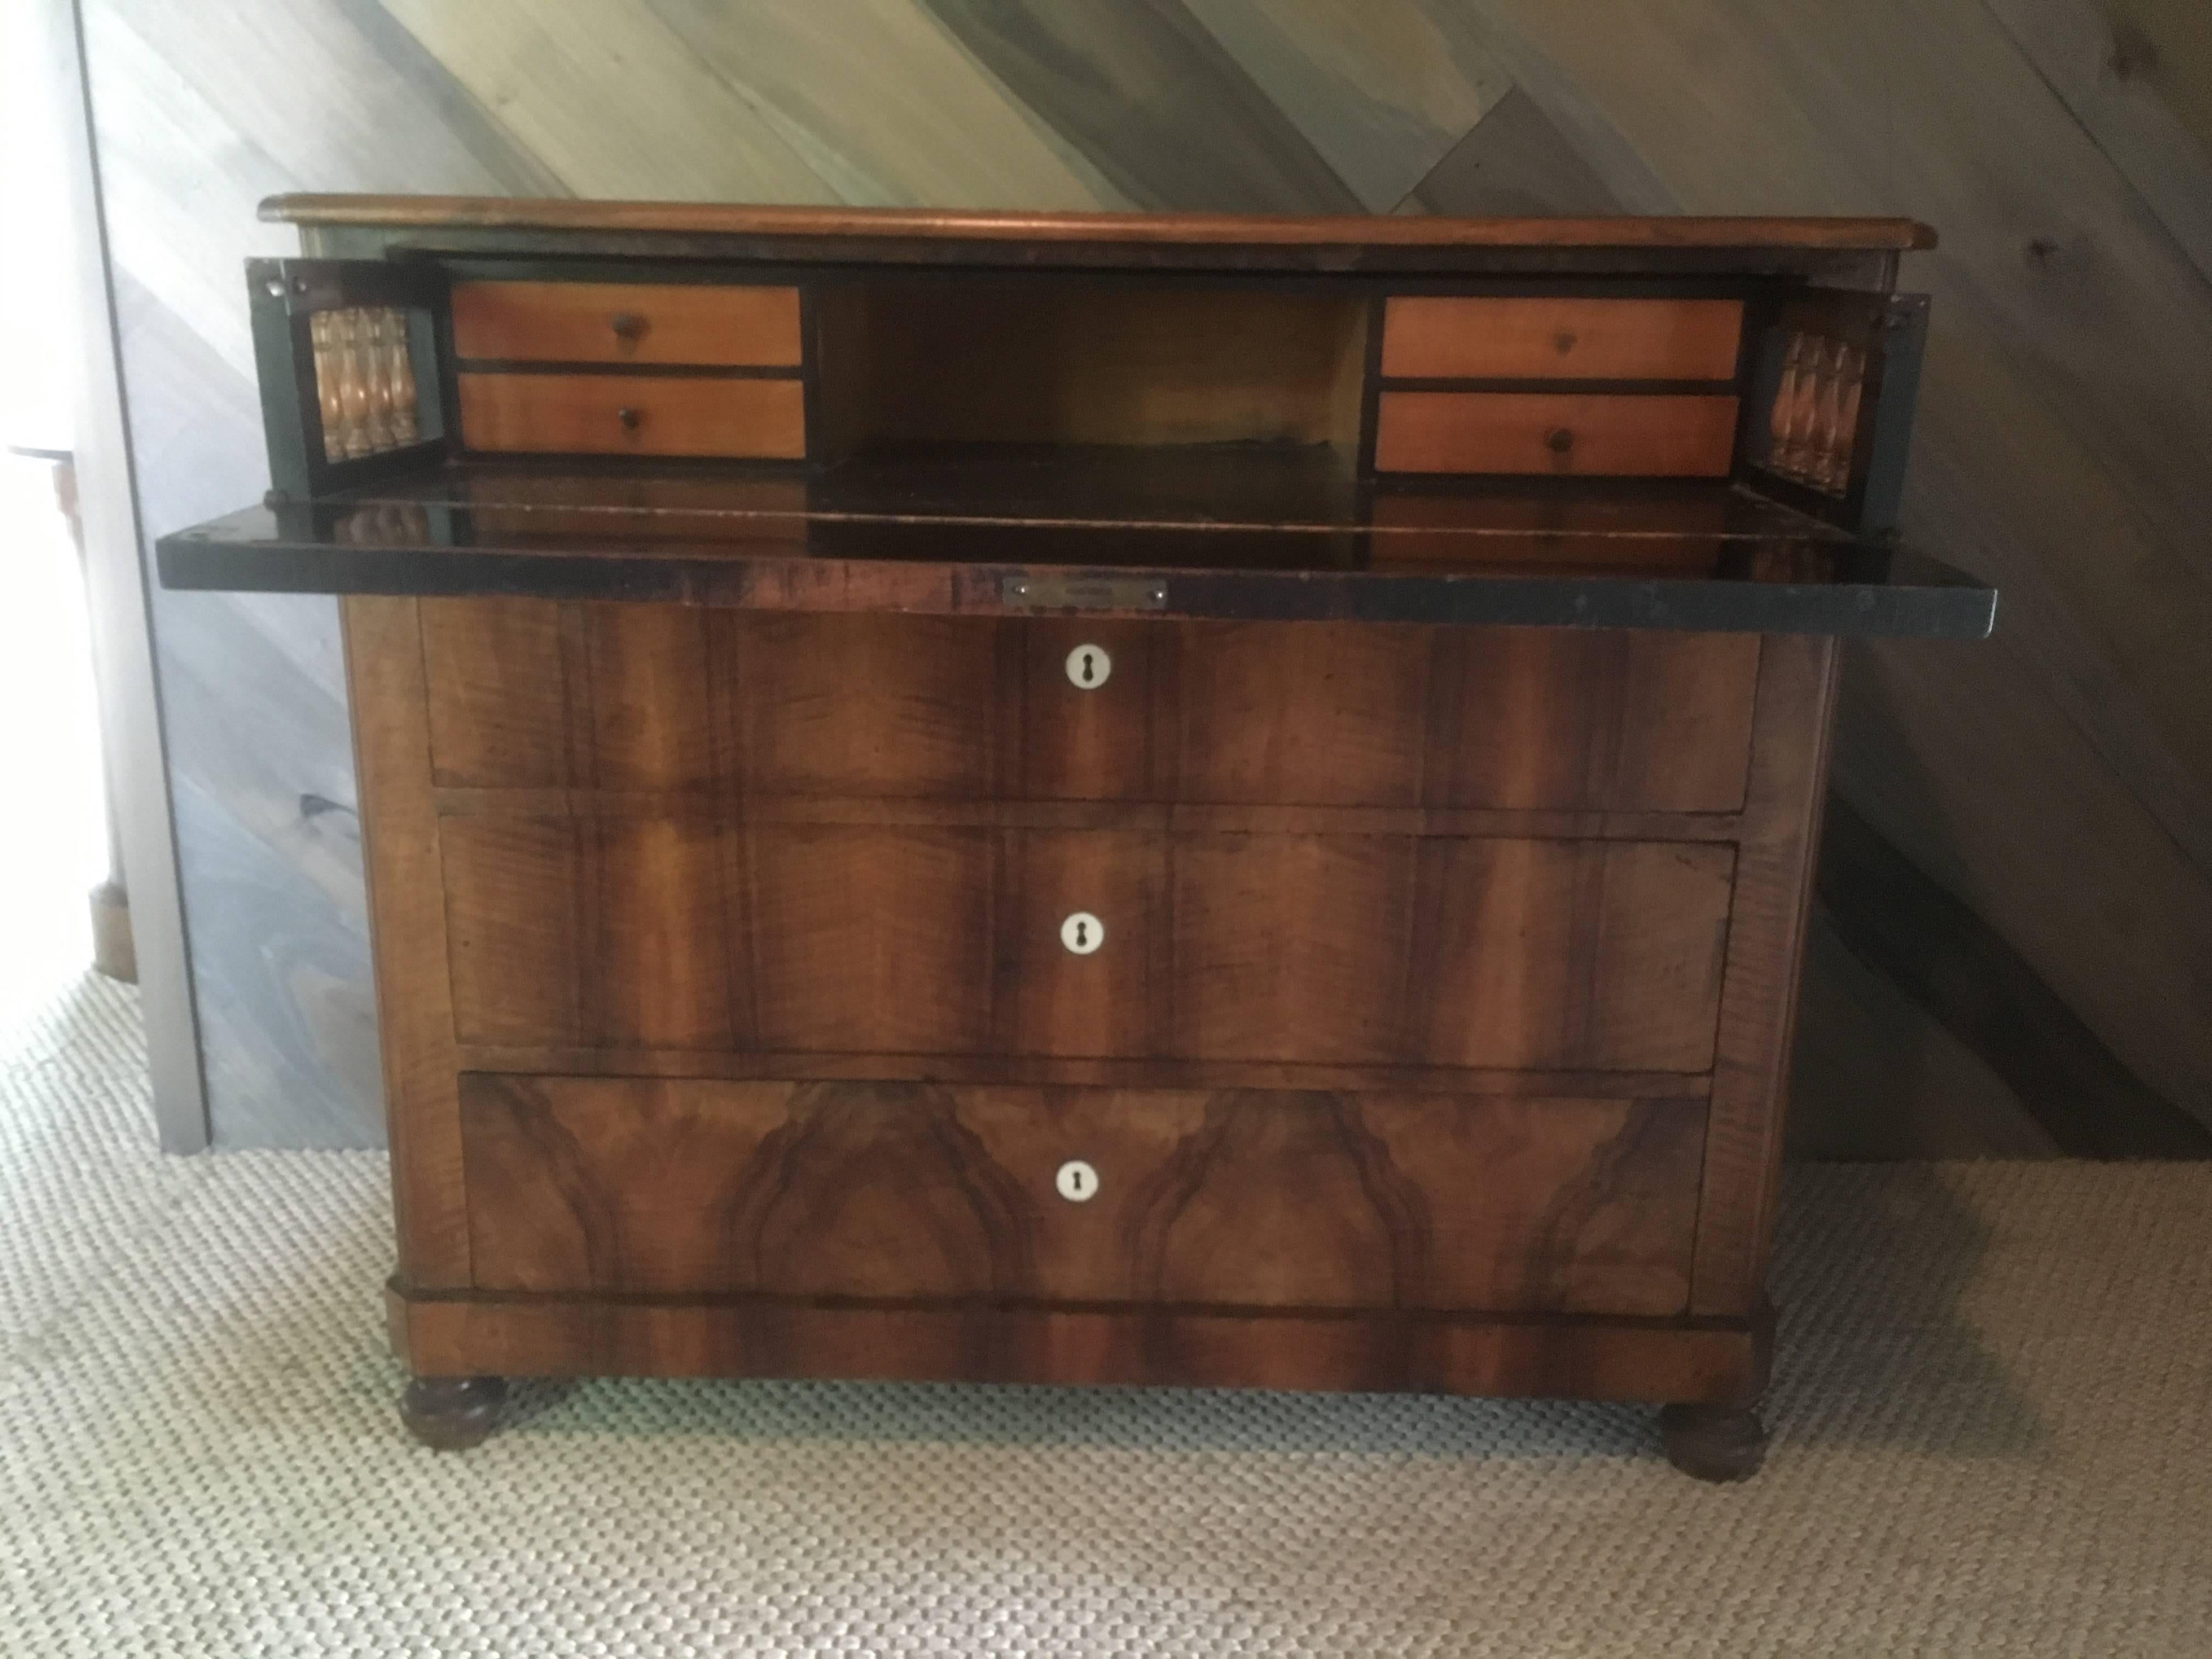 Biedermeier walnut four-drawer chest with bone escutcheons; the waterfall facade with single drawer over three long drawers in a matchbook walnut veneer. The top drop front reveals four ash drawers and ebonized wood with turned spindle column